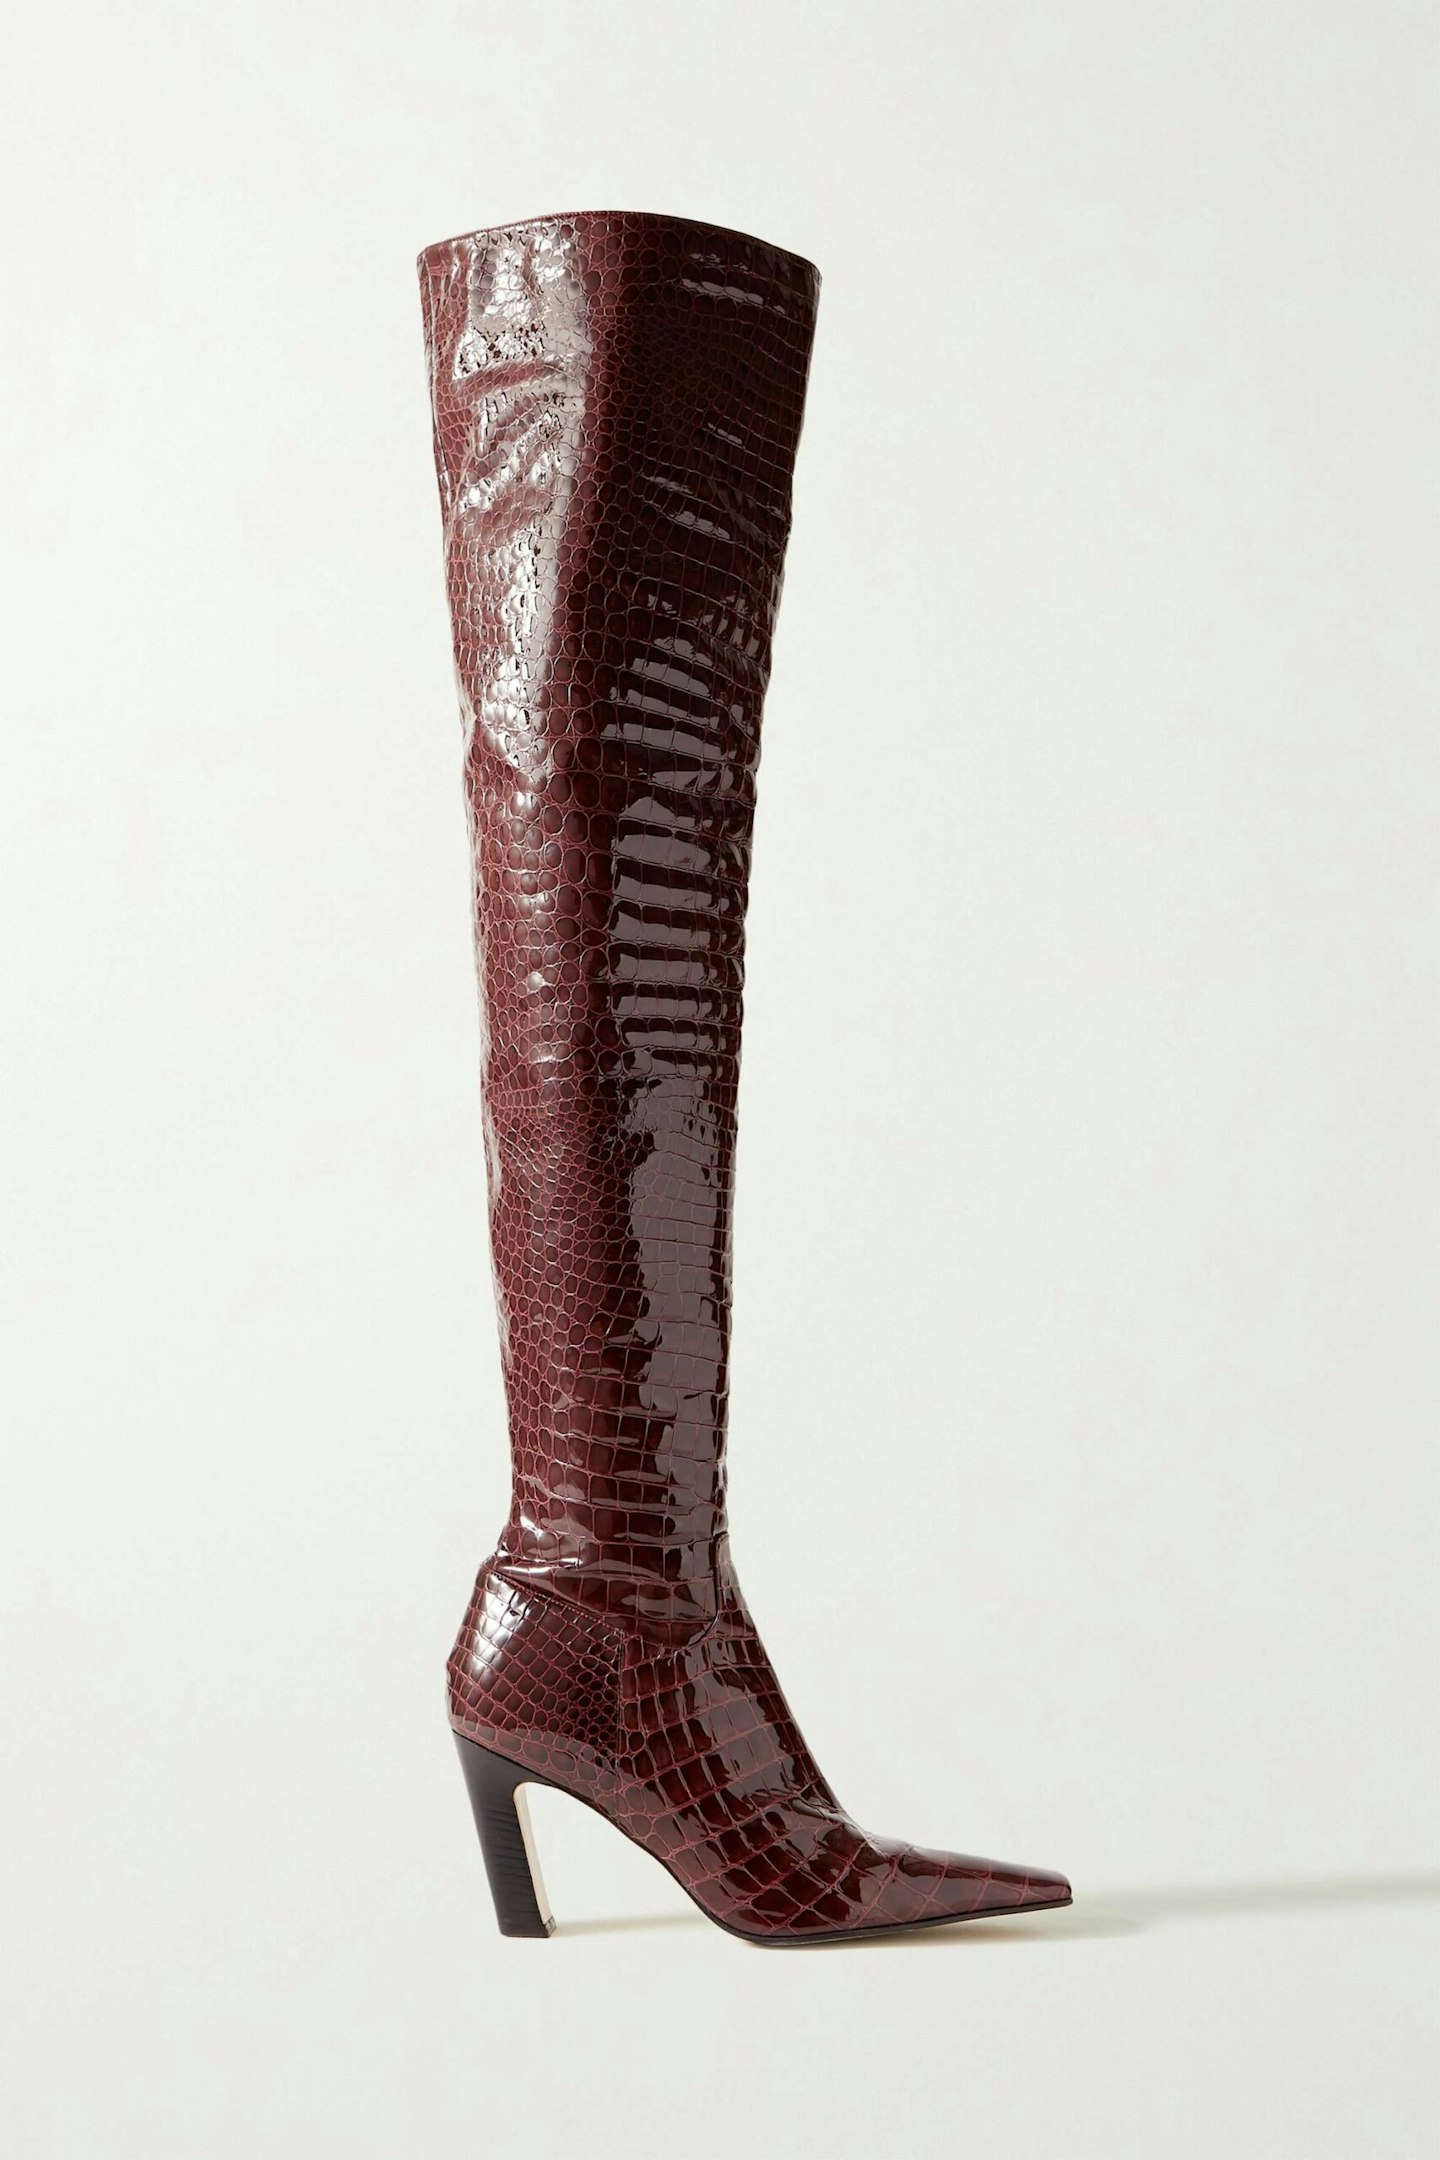 Khaite, Marfa Croc-Effect Patent-Leather Over-The-Knee Boots